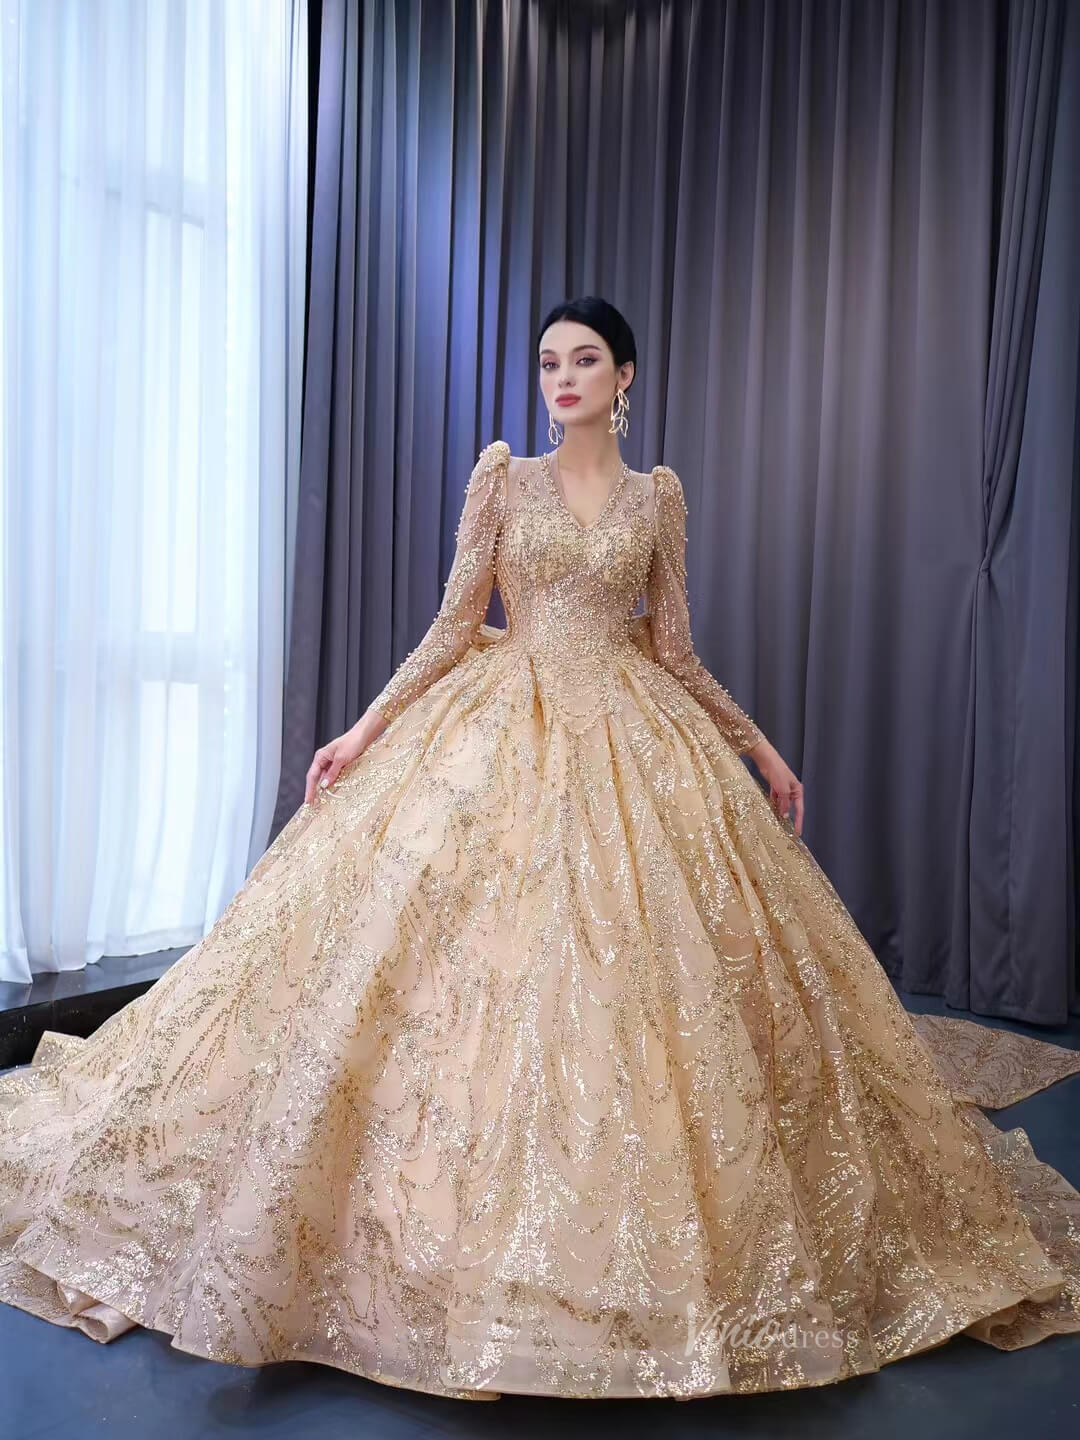 Gold Sparkle Wedding Dress Long Sleeve Ball Gown With Train